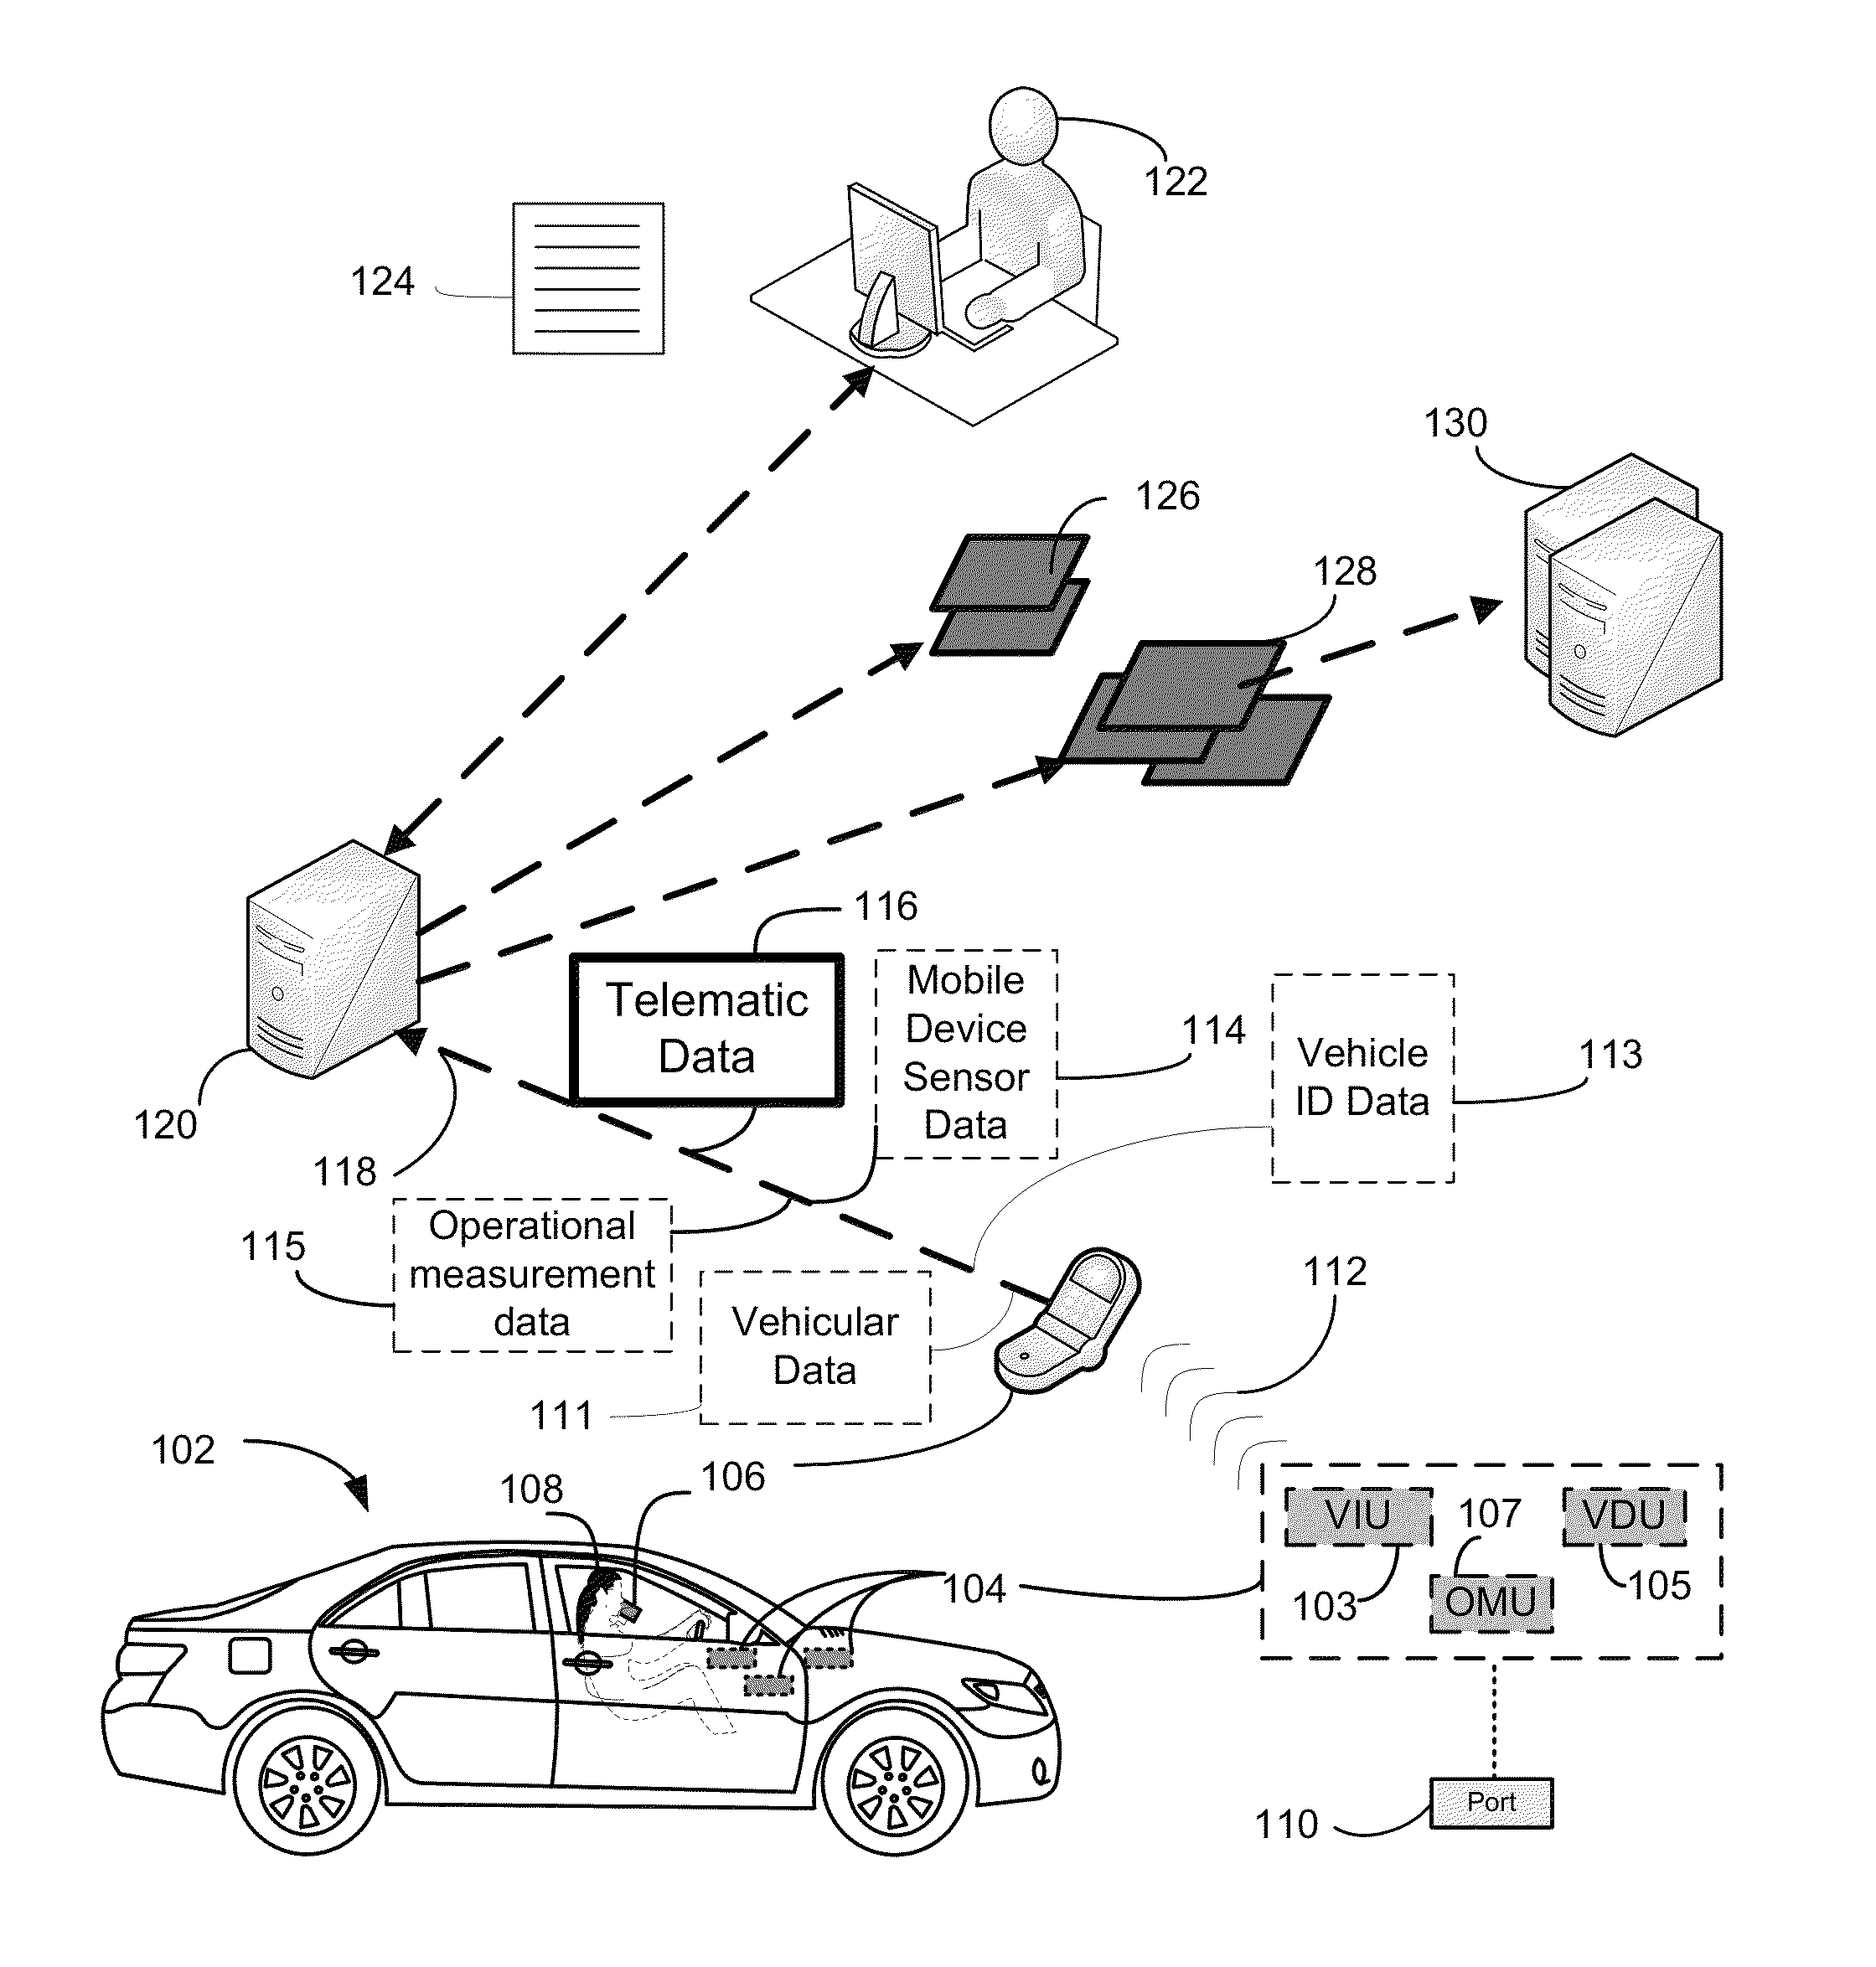 Systems and methods for telematics monitoring and communications